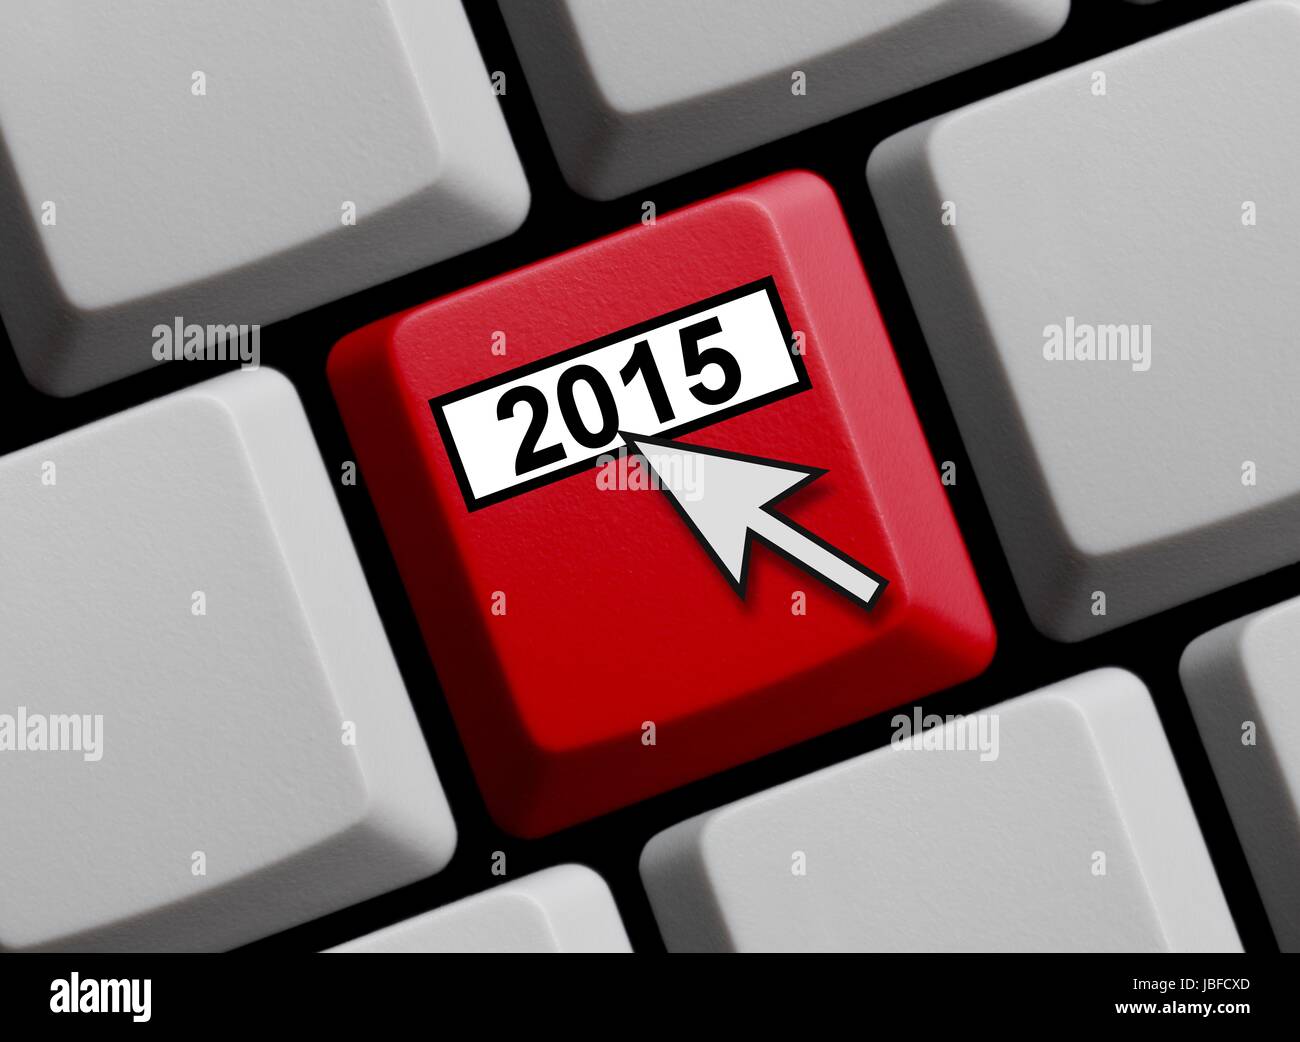 2015 - new year online Stock Photo